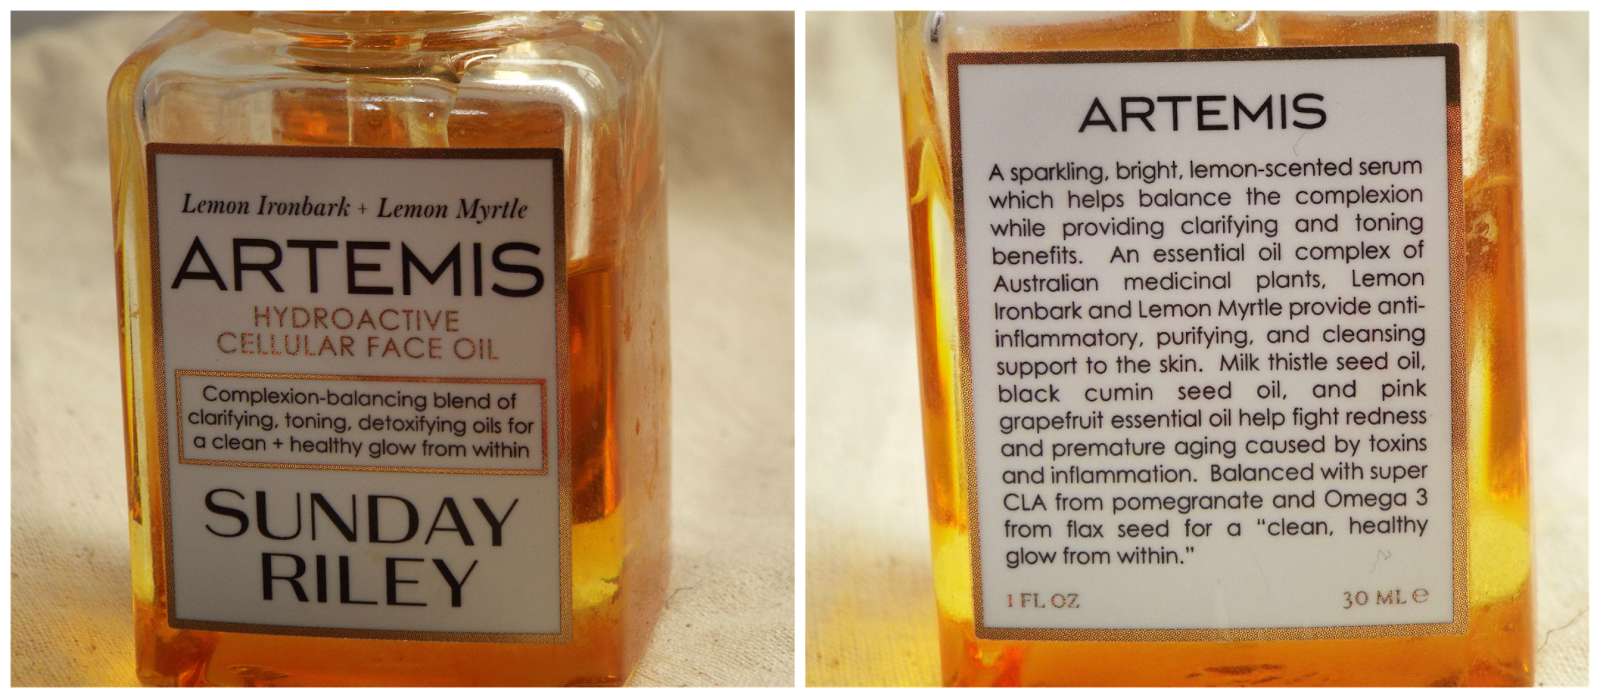 sunday riley artemis oil review